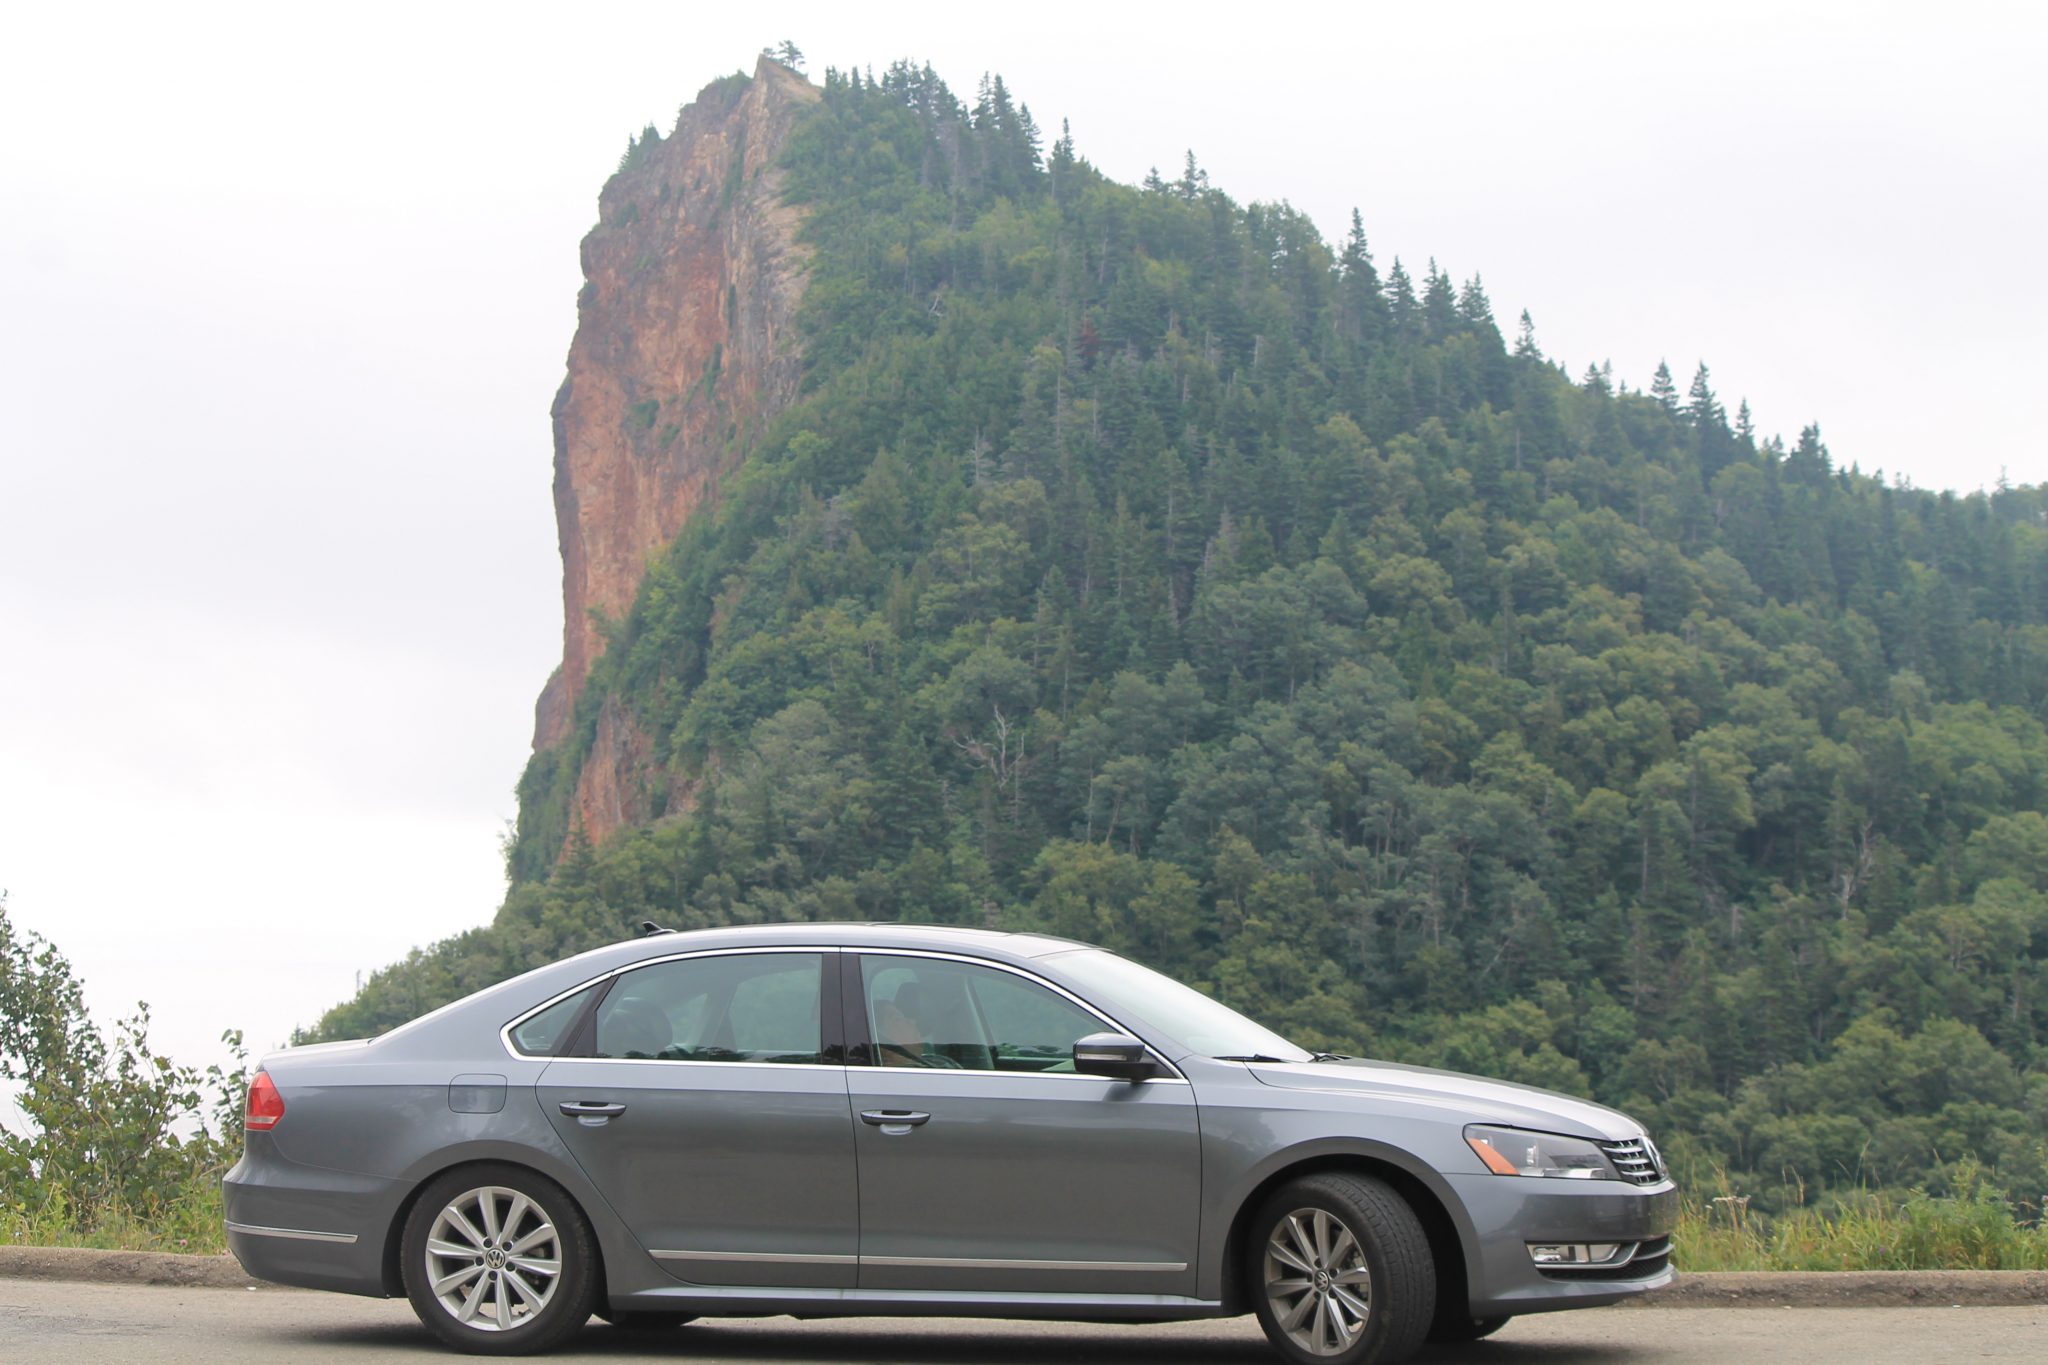 Touring Quebec economically and comfortably in a 2012 Volkswagen Passat